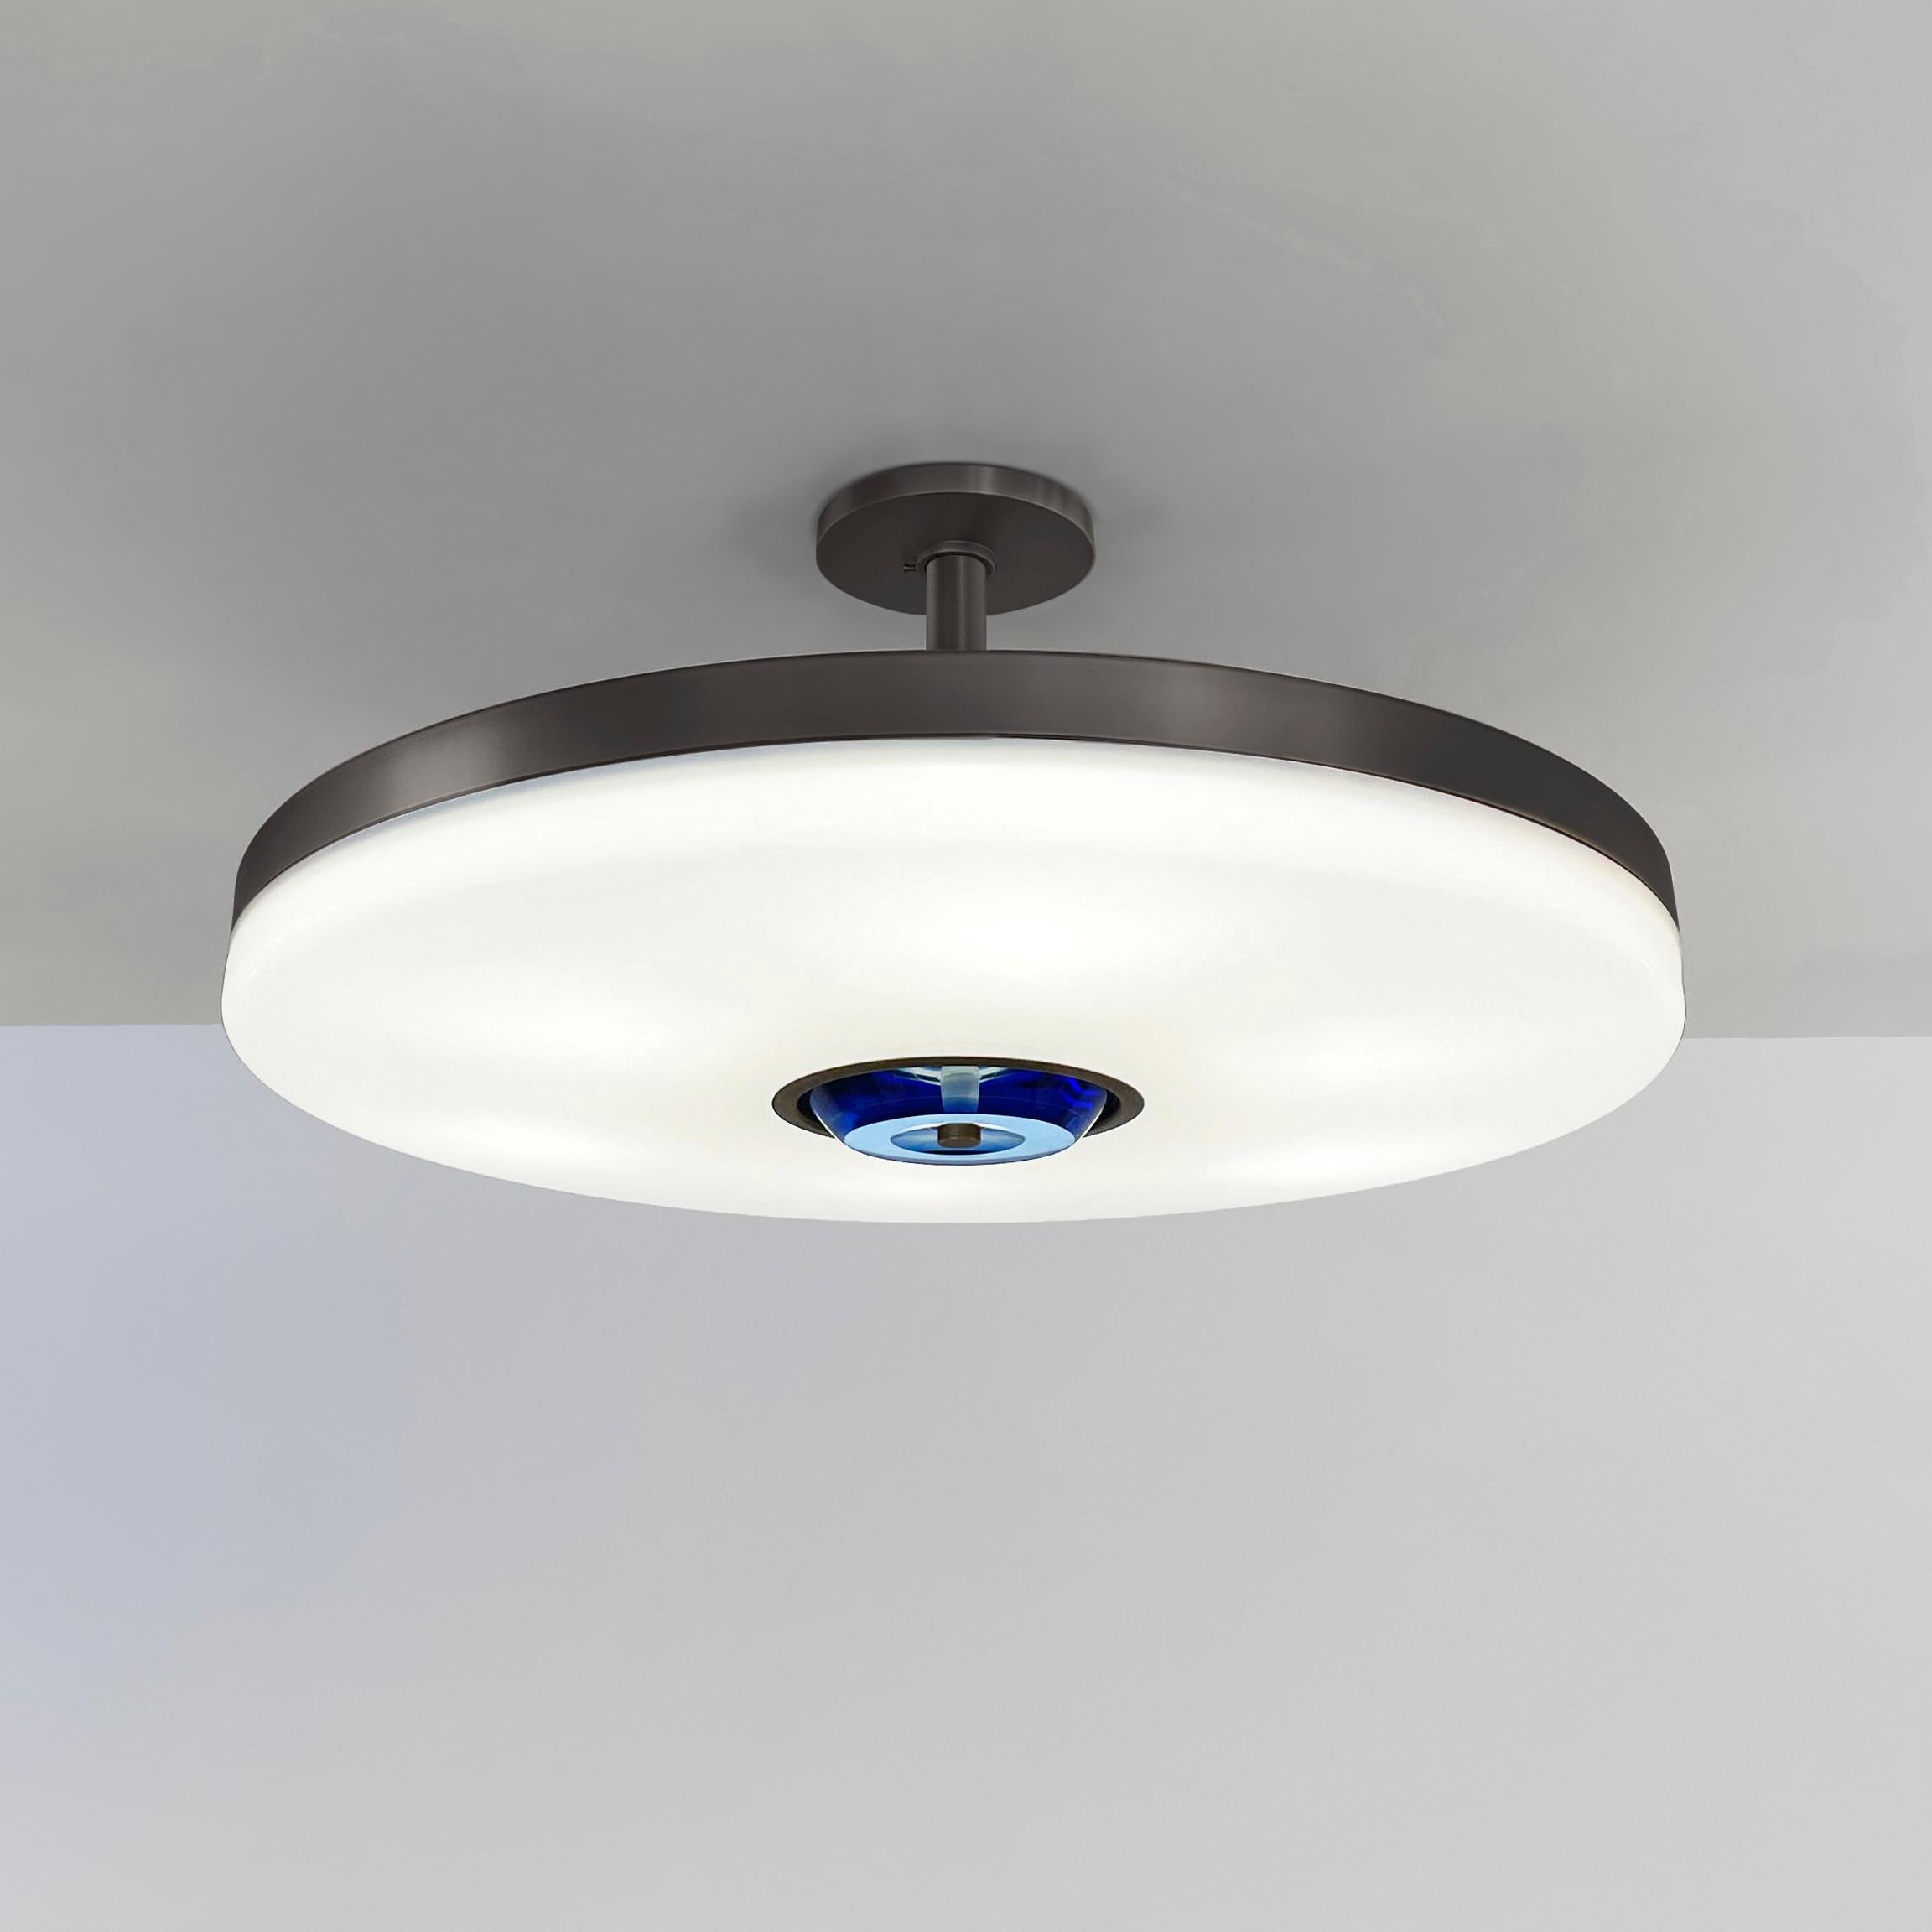 Italian Iris Ceiling Light by Gaspare Asaro - Polished Nickel Finish For Sale